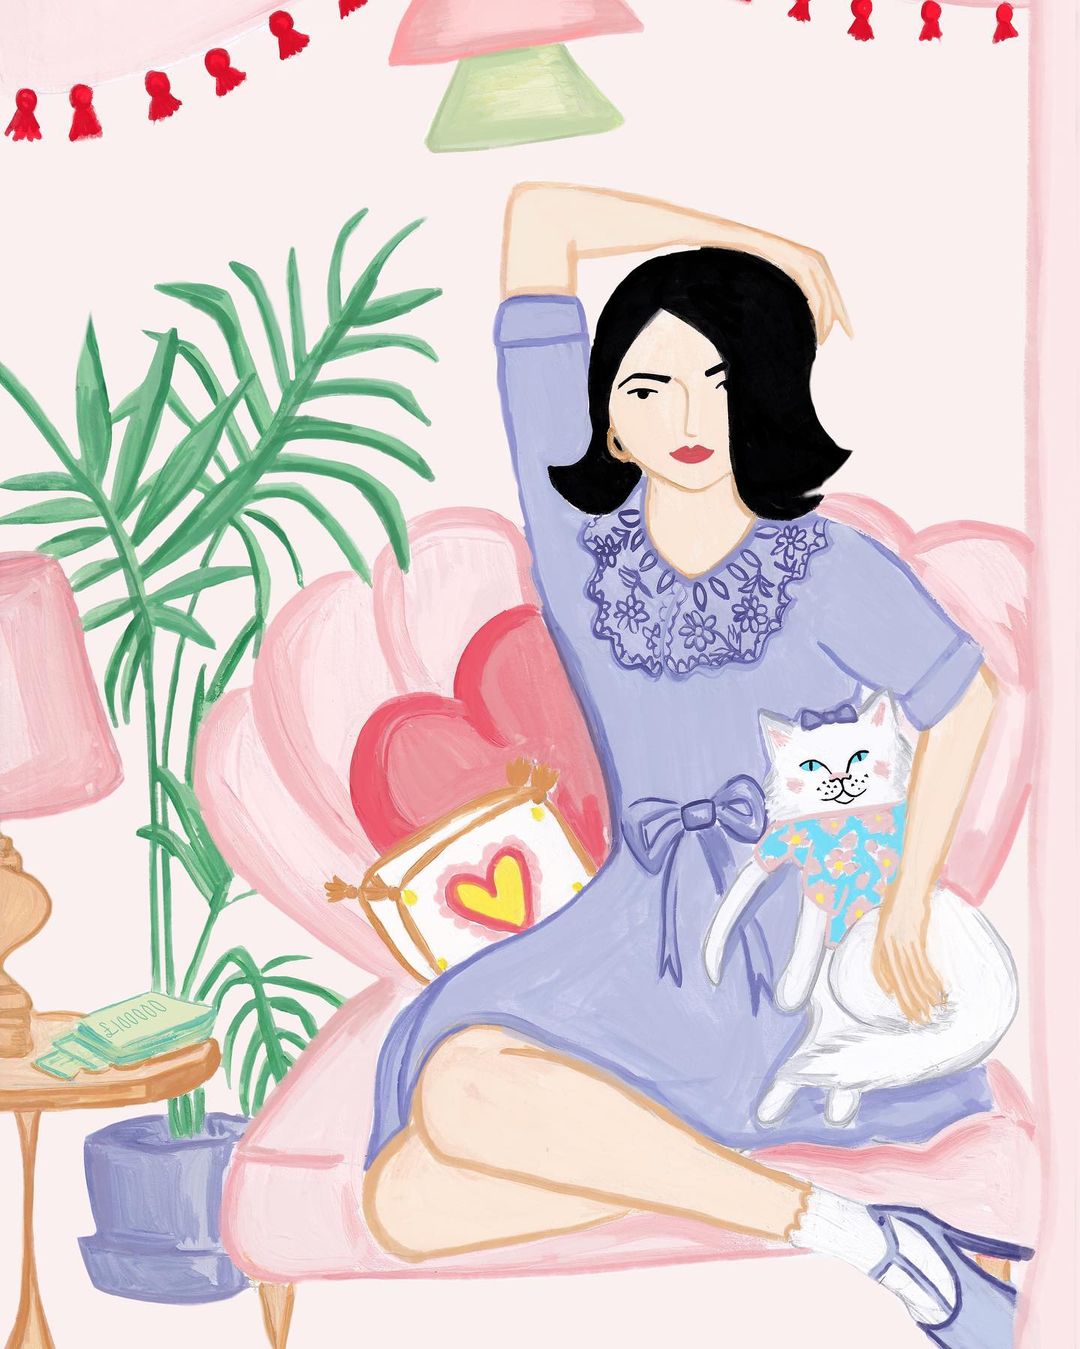 Lady in lavender with her cat illustration by Emma Locke